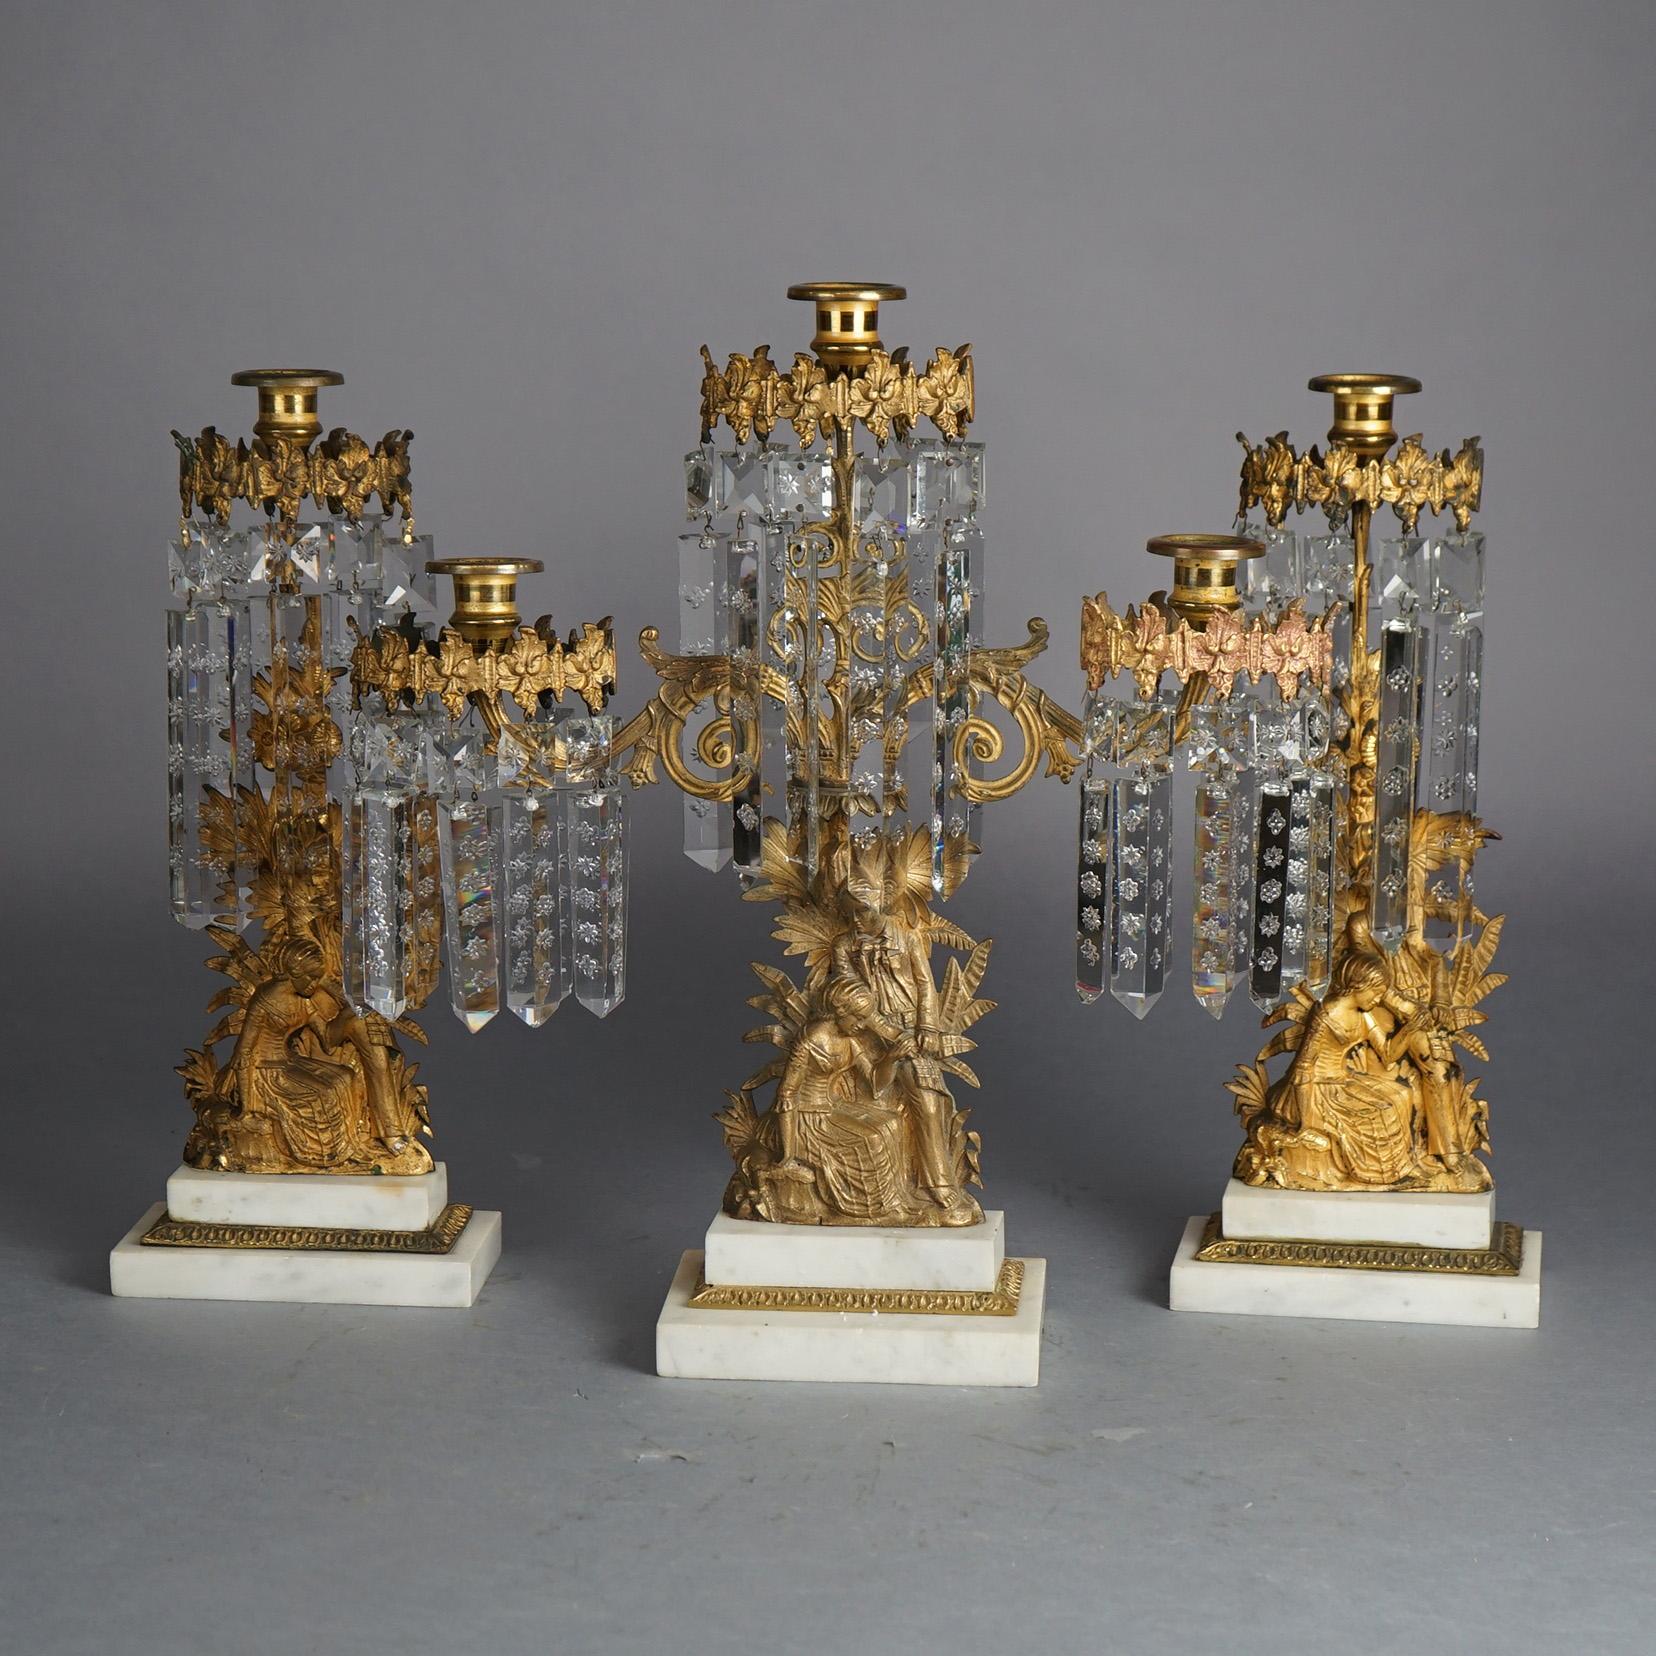 Antique Gilt Bronze American Girandole Candelabras with Marble & Crystals C1880 For Sale 6